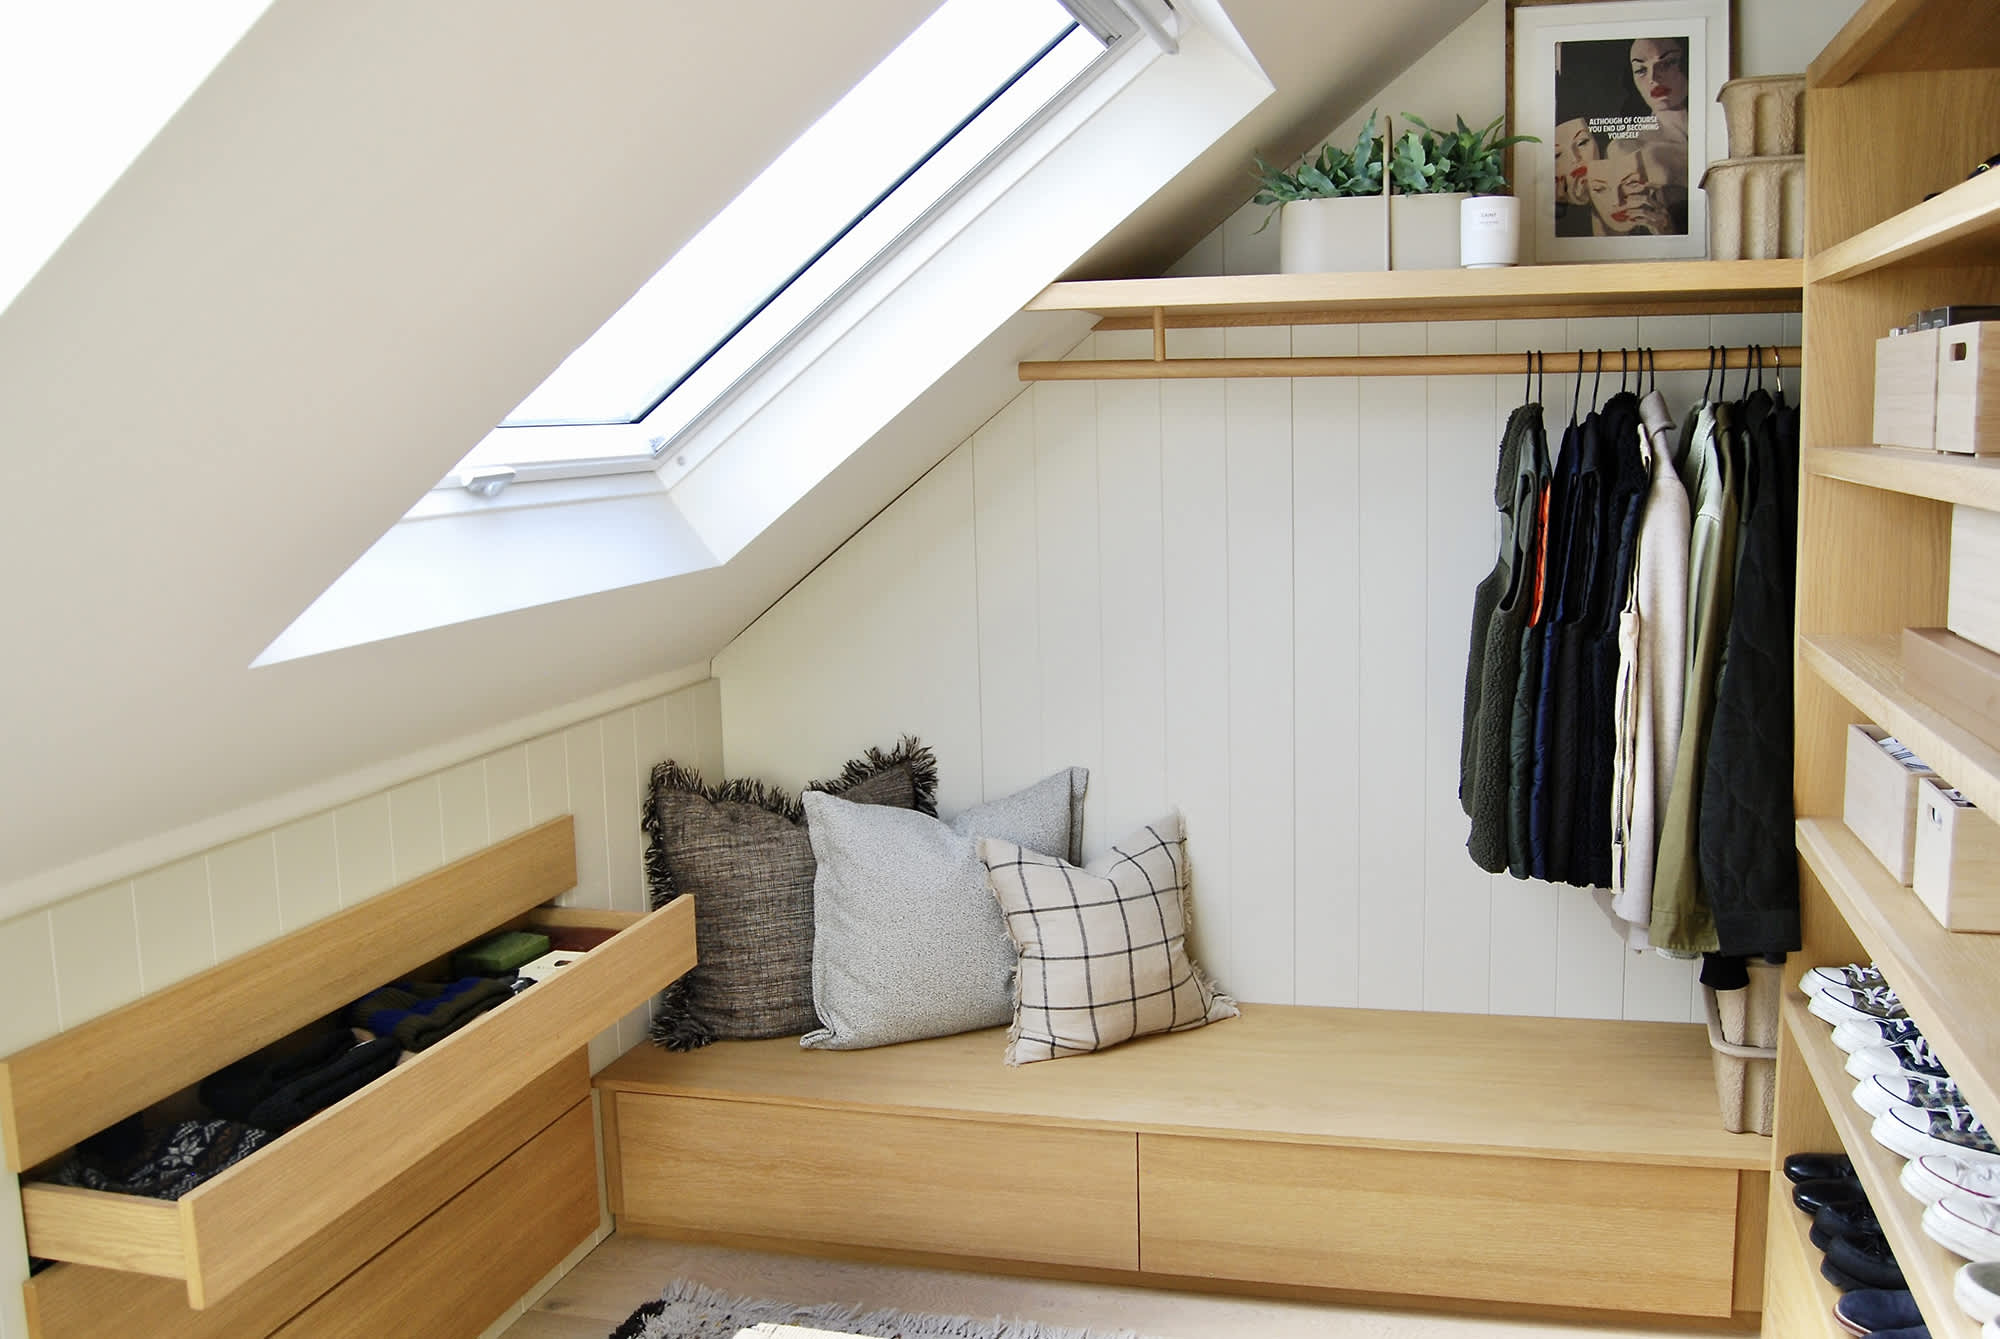 How to Make Your Walk-In Closet a More Stylish and Functional Space